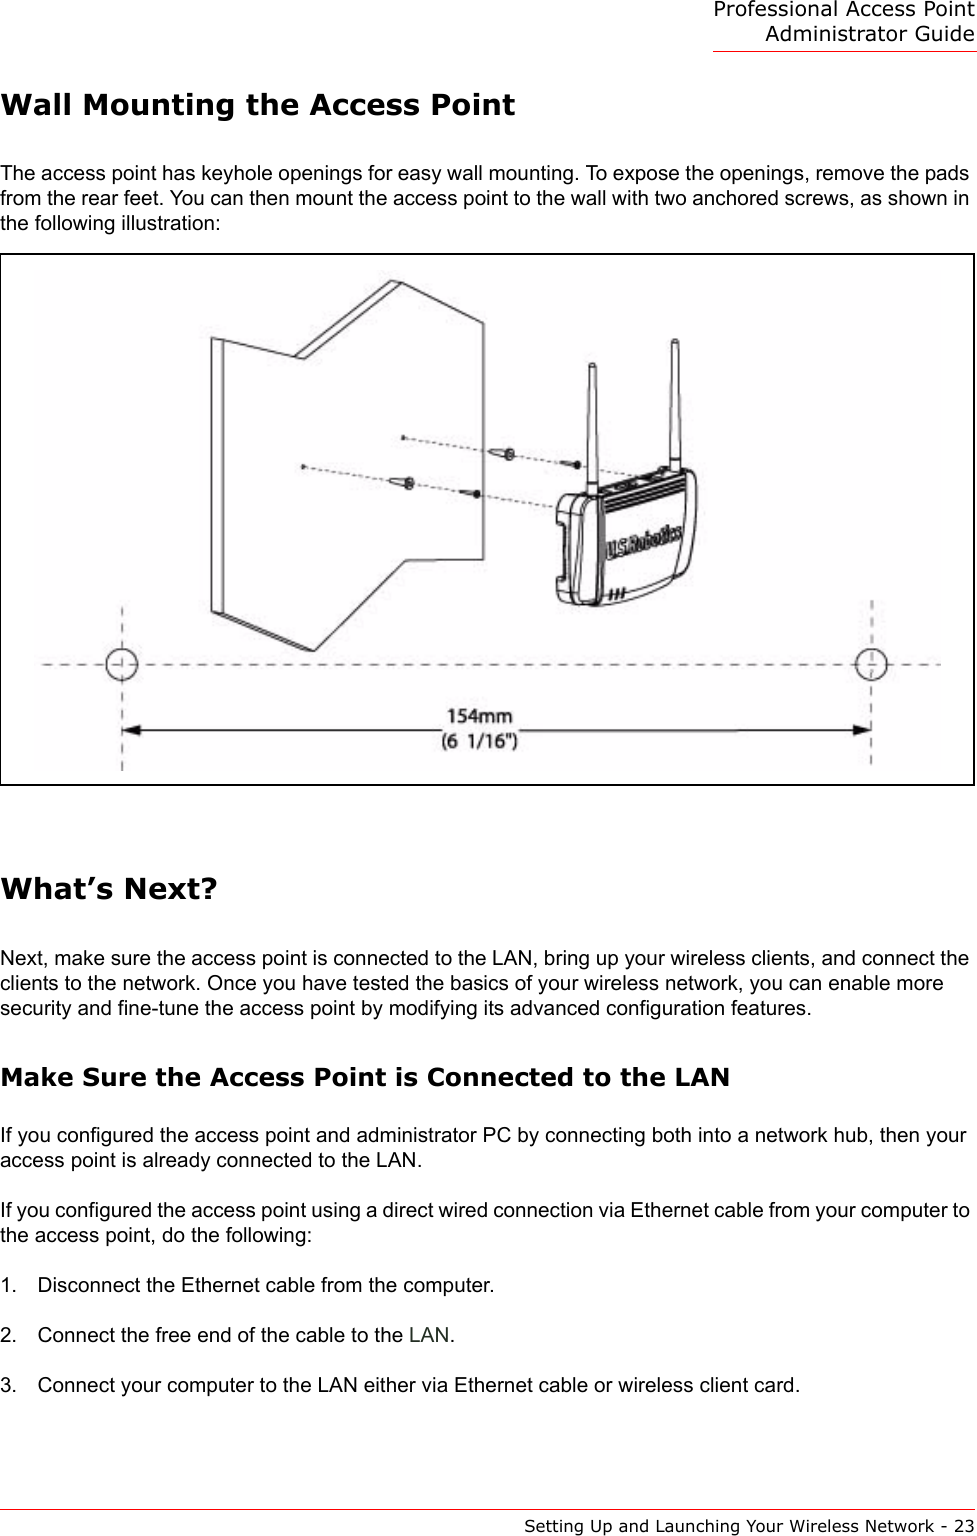 Professional Access Point Administrator GuideSetting Up and Launching Your Wireless Network - 23Wall Mounting the Access PointThe access point has keyhole openings for easy wall mounting. To expose the openings, remove the pads from the rear feet. You can then mount the access point to the wall with two anchored screws, as shown in the following illustration:What’s Next?Next, make sure the access point is connected to the LAN, bring up your wireless clients, and connect the clients to the network. Once you have tested the basics of your wireless network, you can enable more security and fine-tune the access point by modifying its advanced configuration features.Make Sure the Access Point is Connected to the LANIf you configured the access point and administrator PC by connecting both into a network hub, then your access point is already connected to the LAN.If you configured the access point using a direct wired connection via Ethernet cable from your computer to the access point, do the following:1. Disconnect the Ethernet cable from the computer.2. Connect the free end of the cable to the LAN.3. Connect your computer to the LAN either via Ethernet cable or wireless client card.